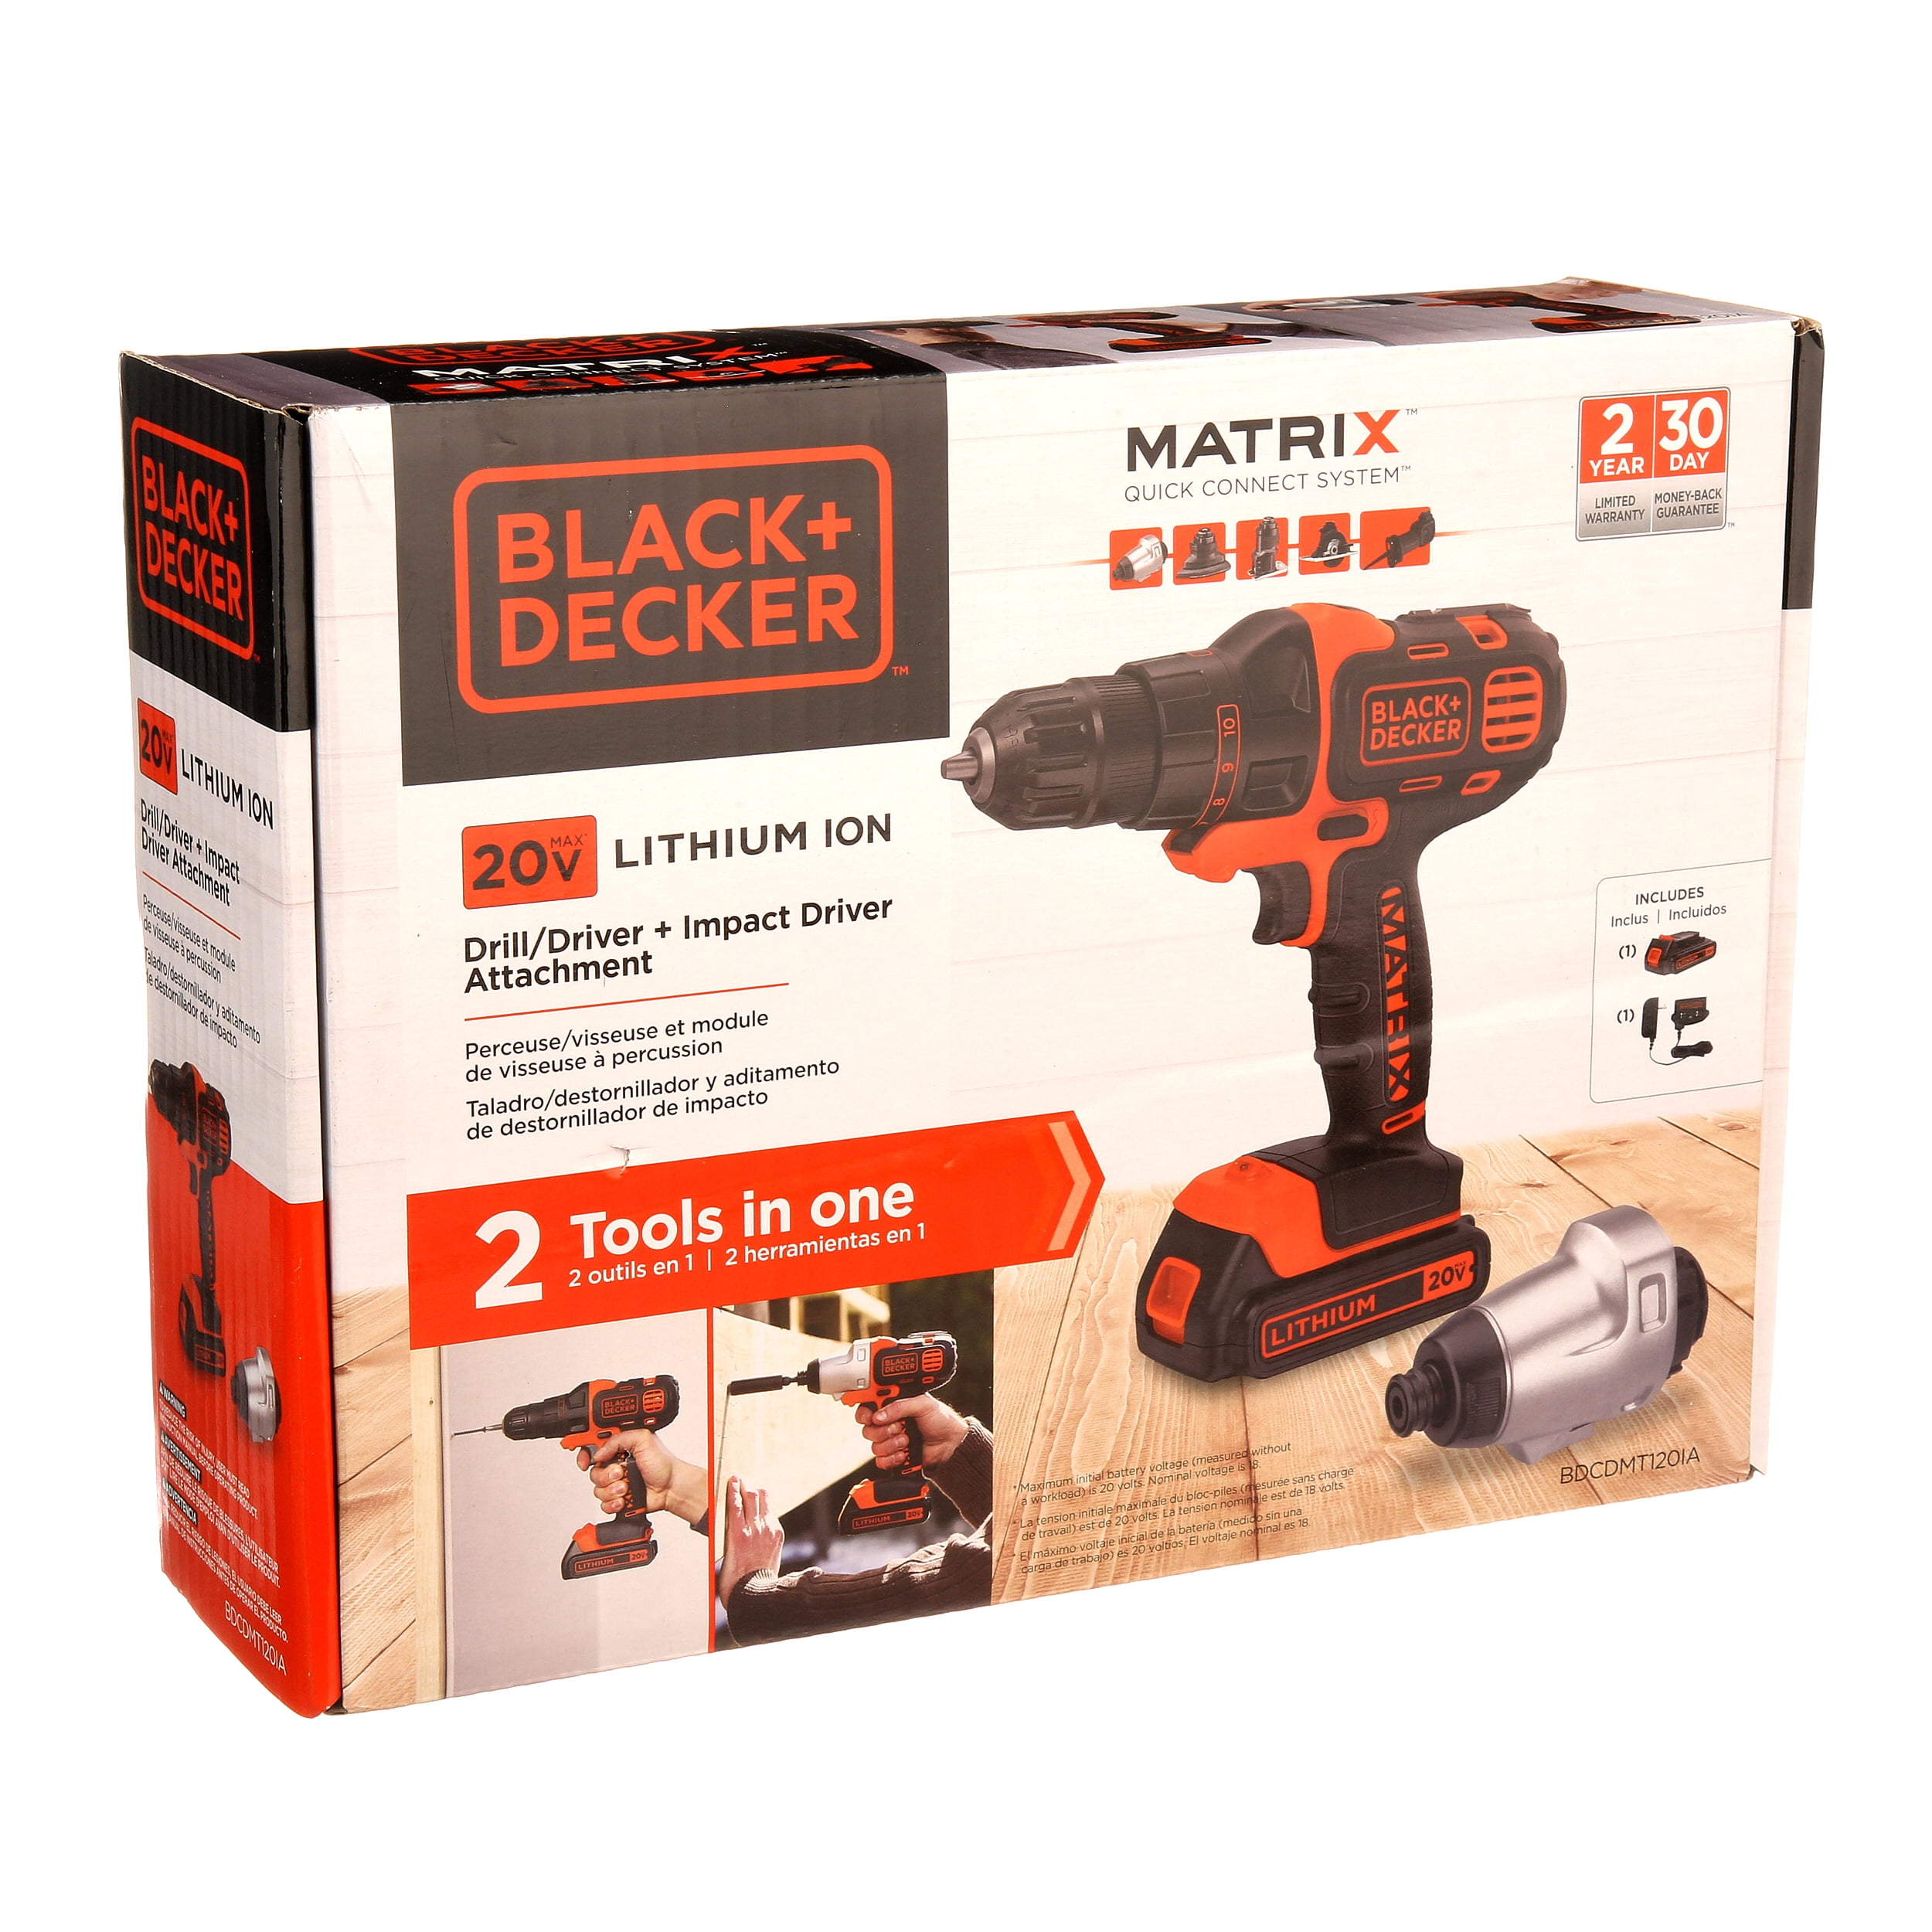 BLACK+DECKER 20V MAX Lithium-Ion Cordless Matrix Drill/Driver and Impact Kit  with 2 Attachments BDCDMT120IA - The Home Depot